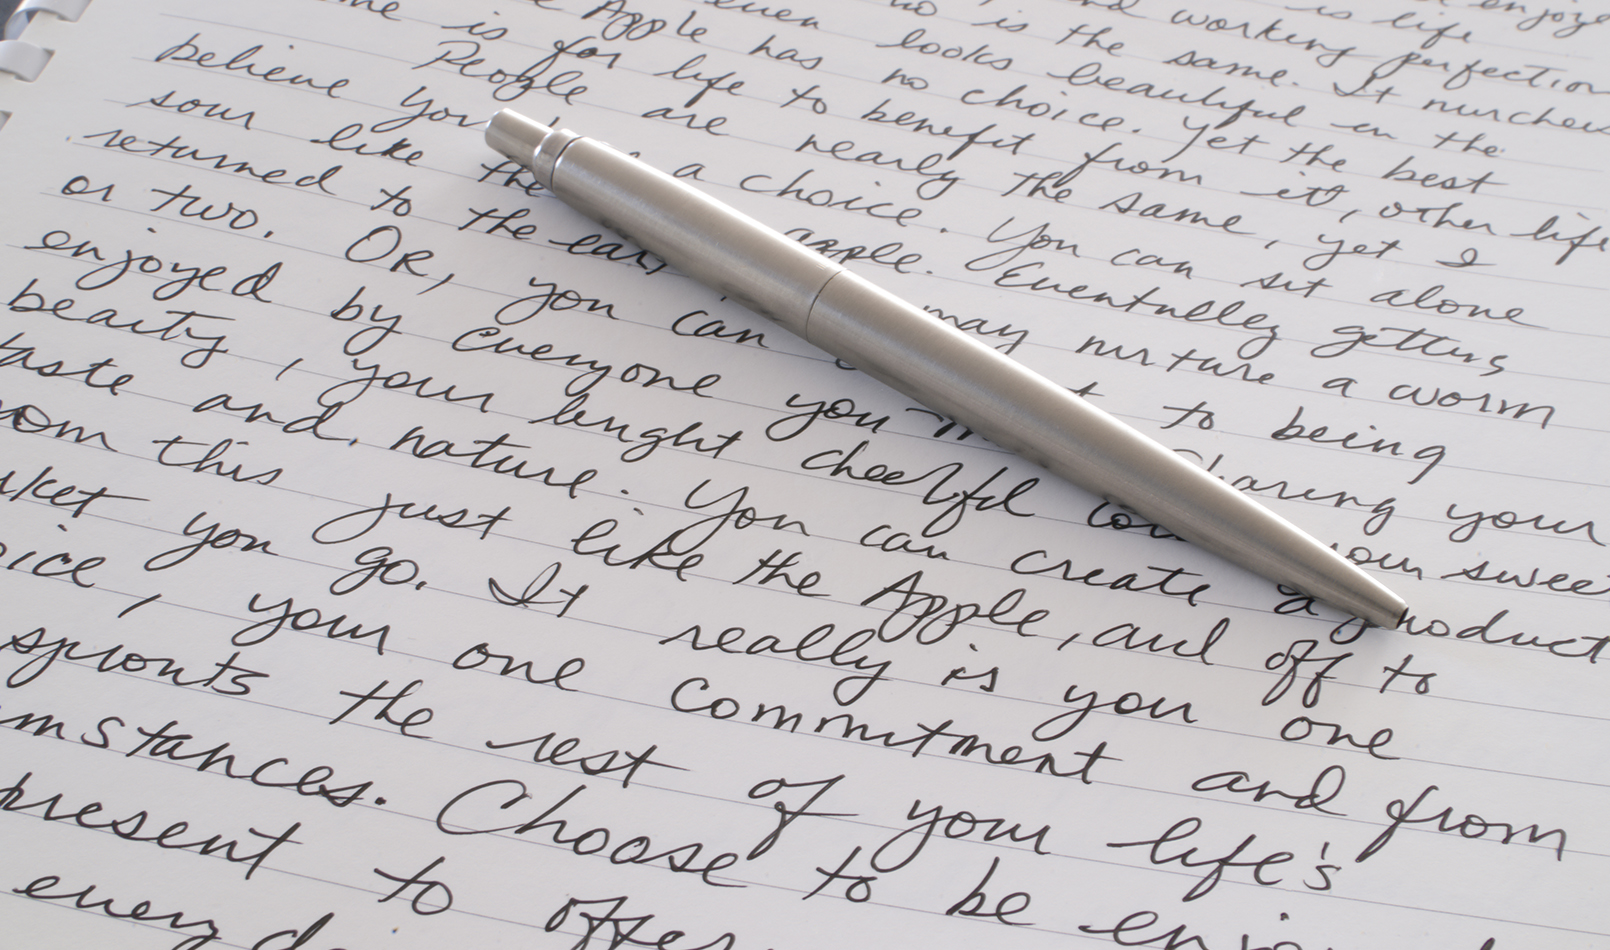 Write your life story: A Stainless Steel Ball Point Pen is Laying on the Written Page of a Spiral Bound Notebook